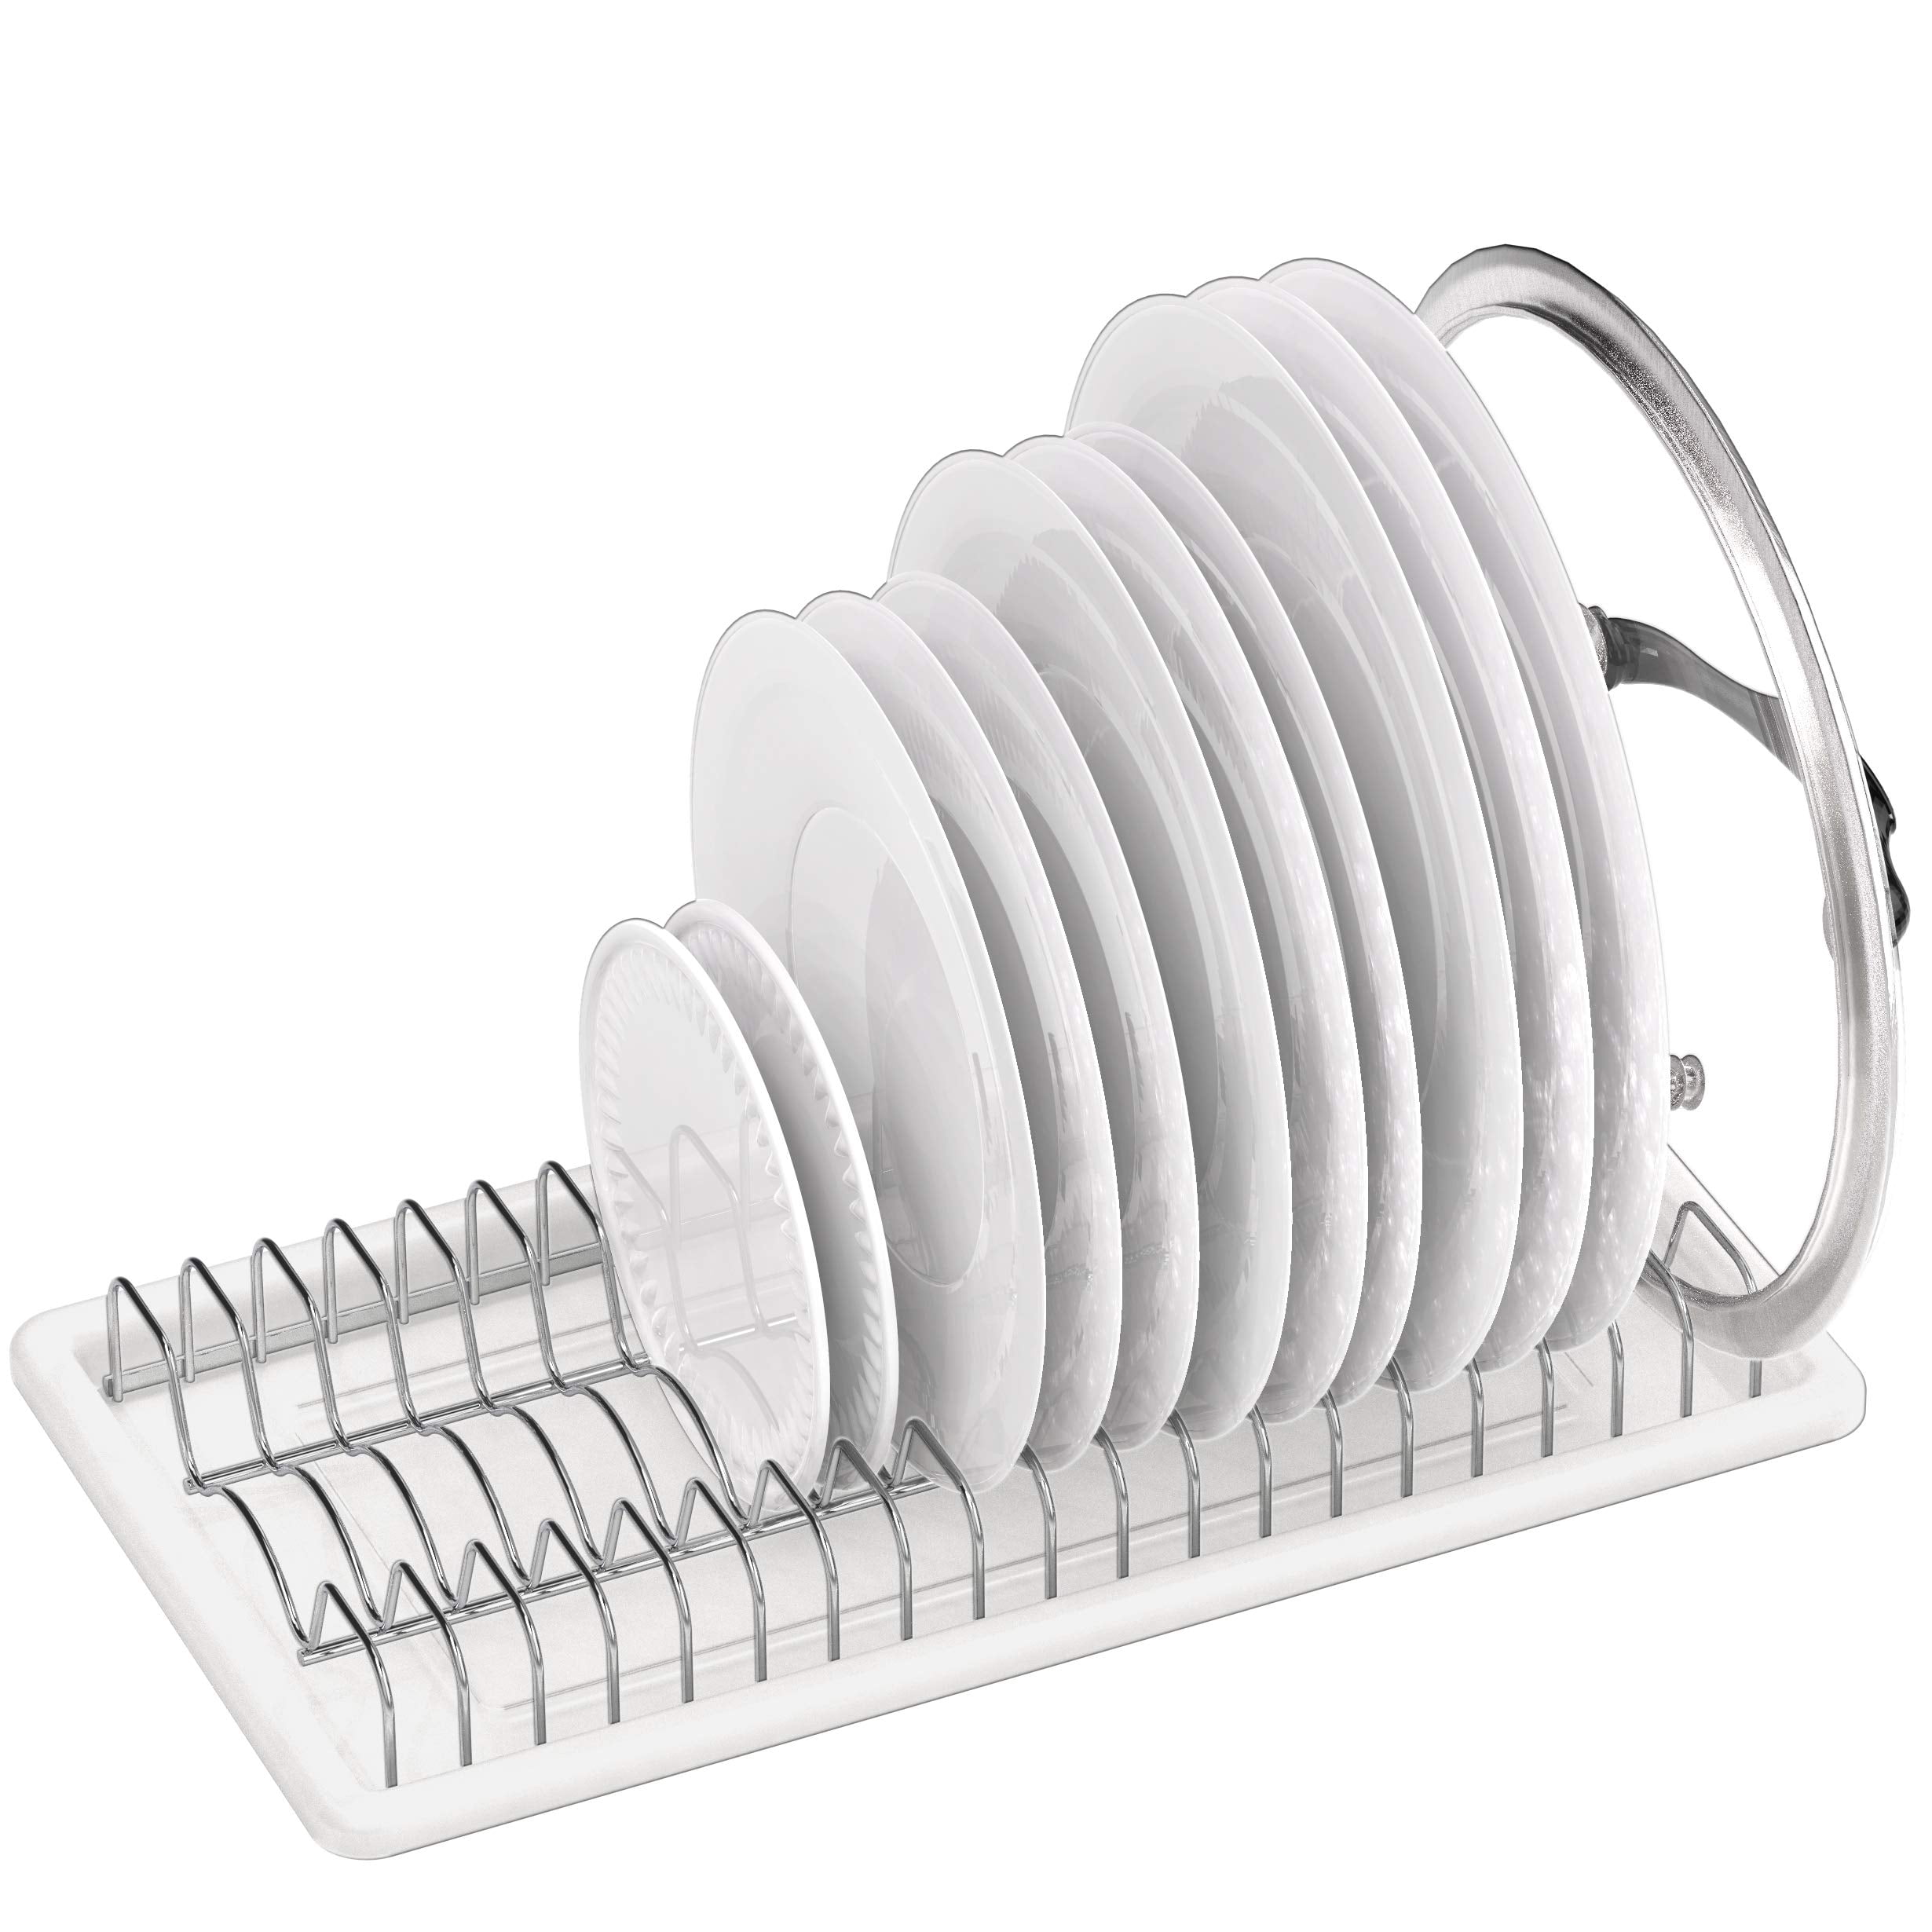 🚨Simple Houseware Over Sink Counter Top Dish Drainer Drying Rack